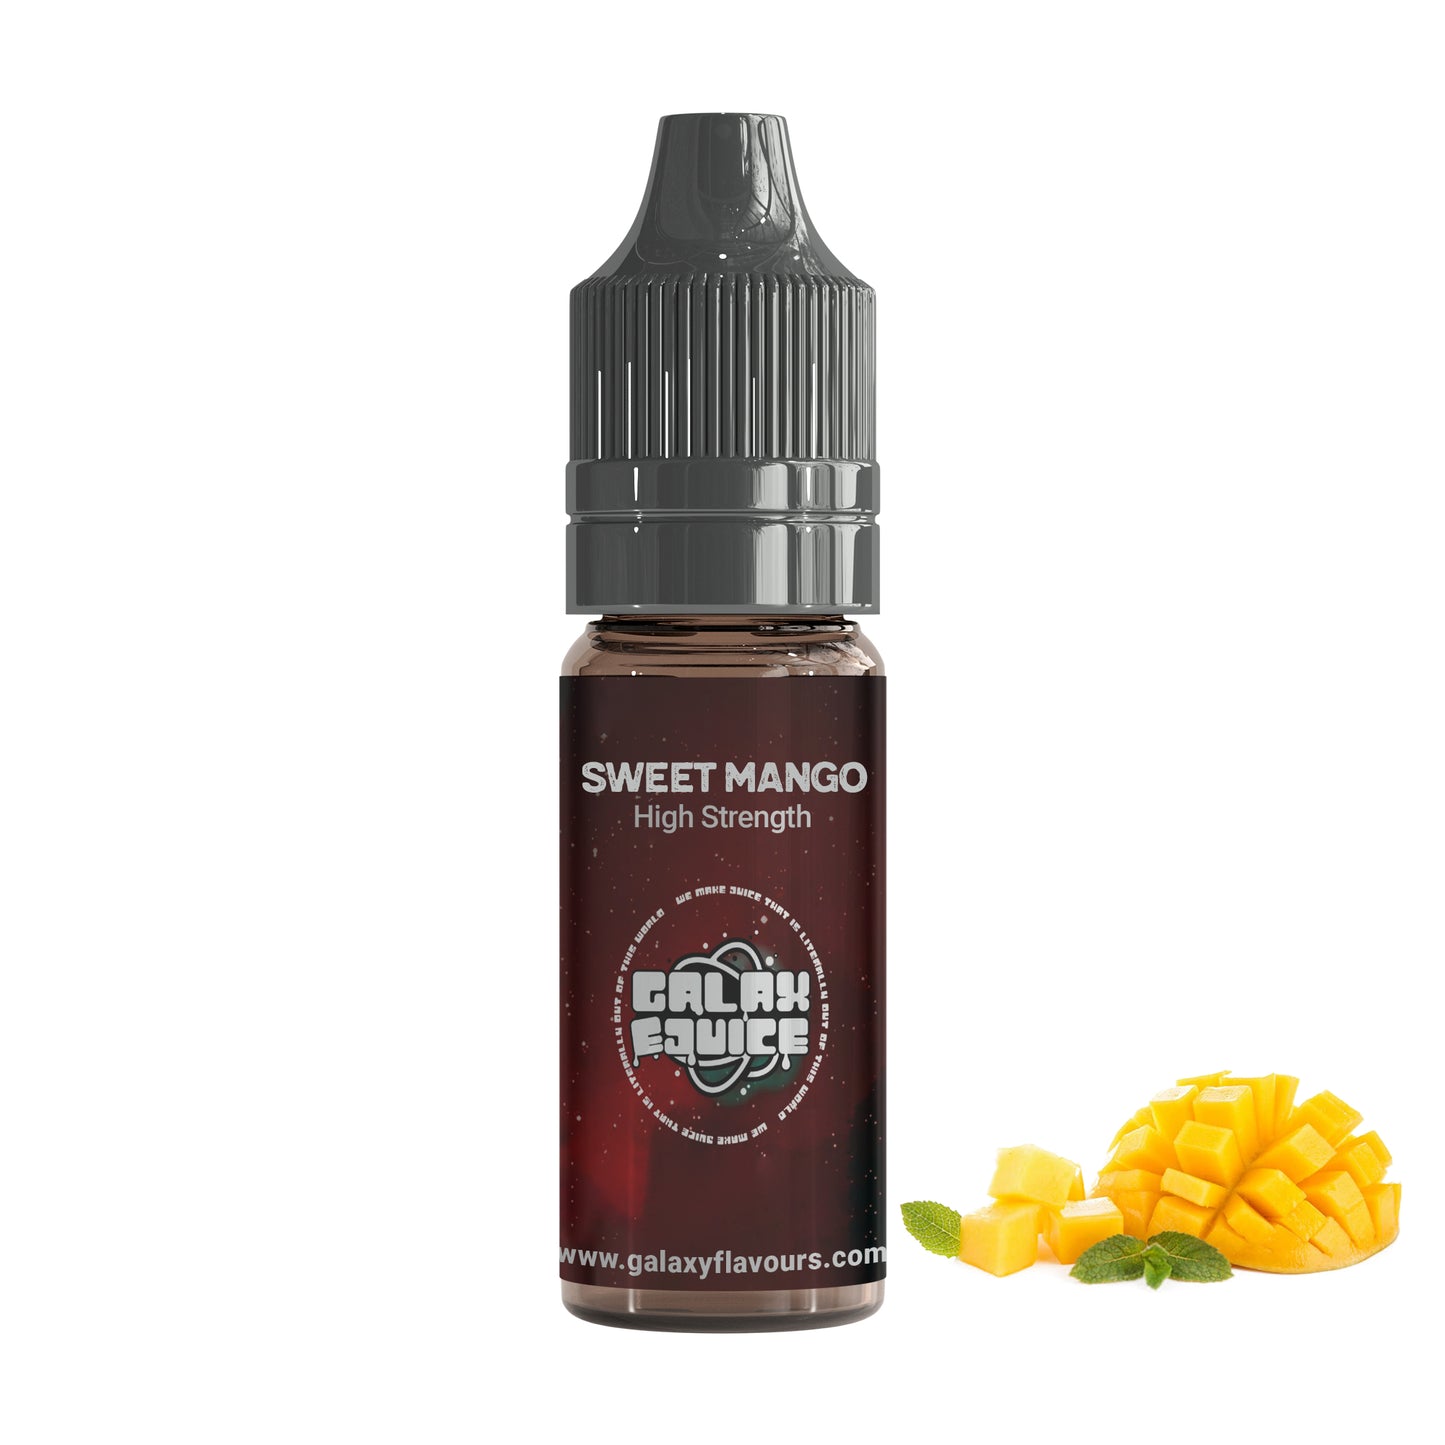 Sweet Mango High Strength Professional Flavouring.